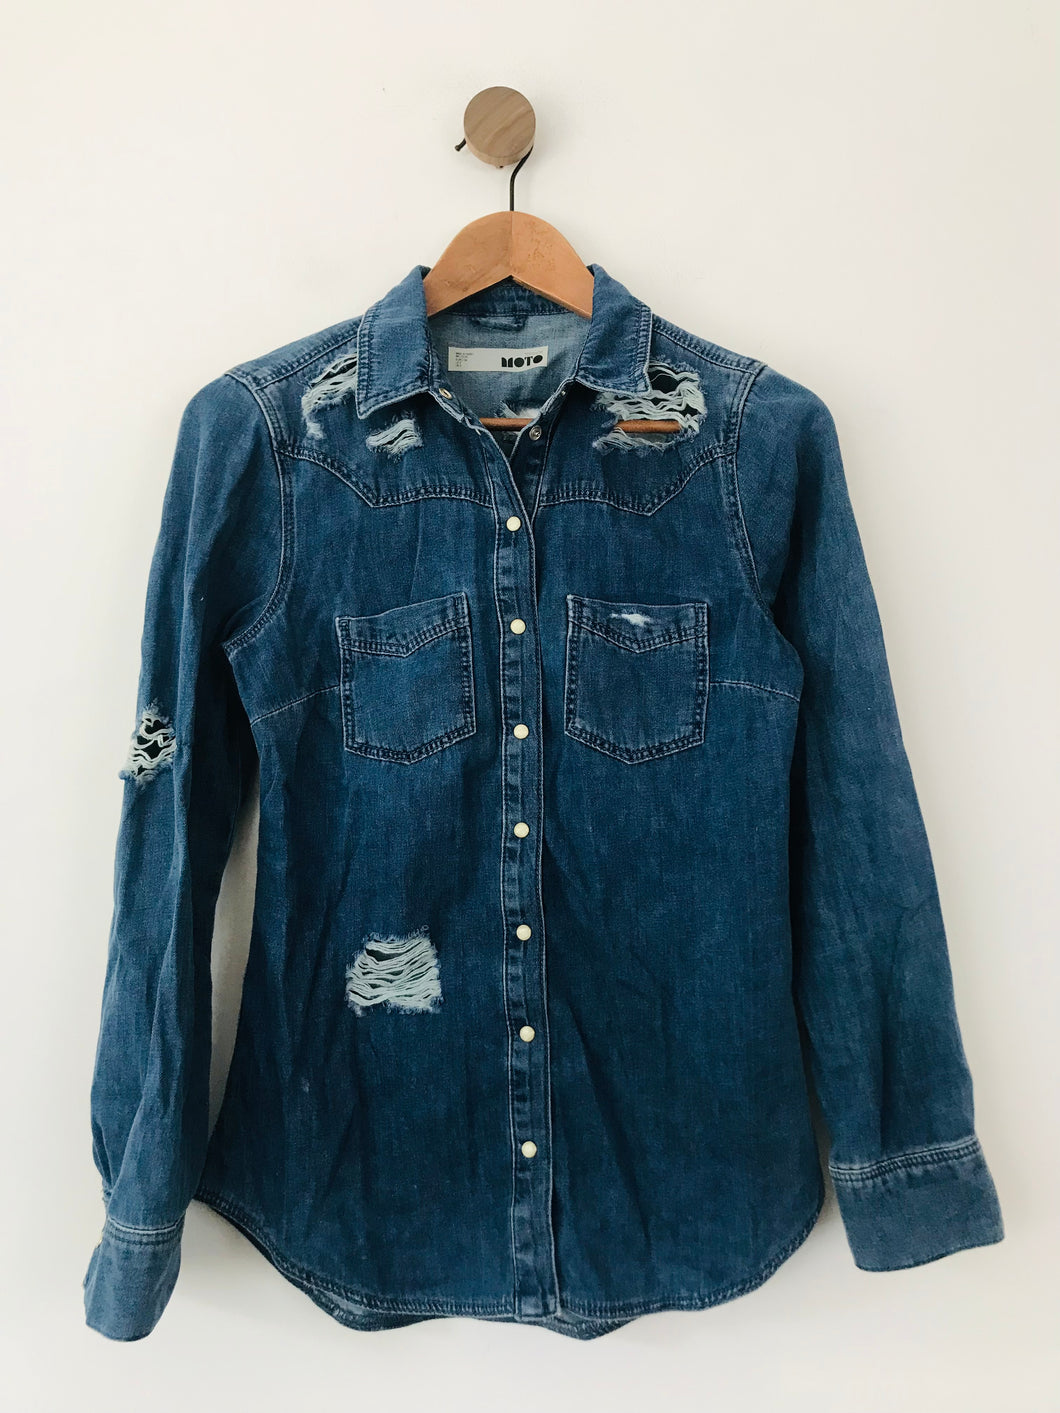 Topshop Women's Distressed Chambray Button-Up Shirt | UK6 | Blue